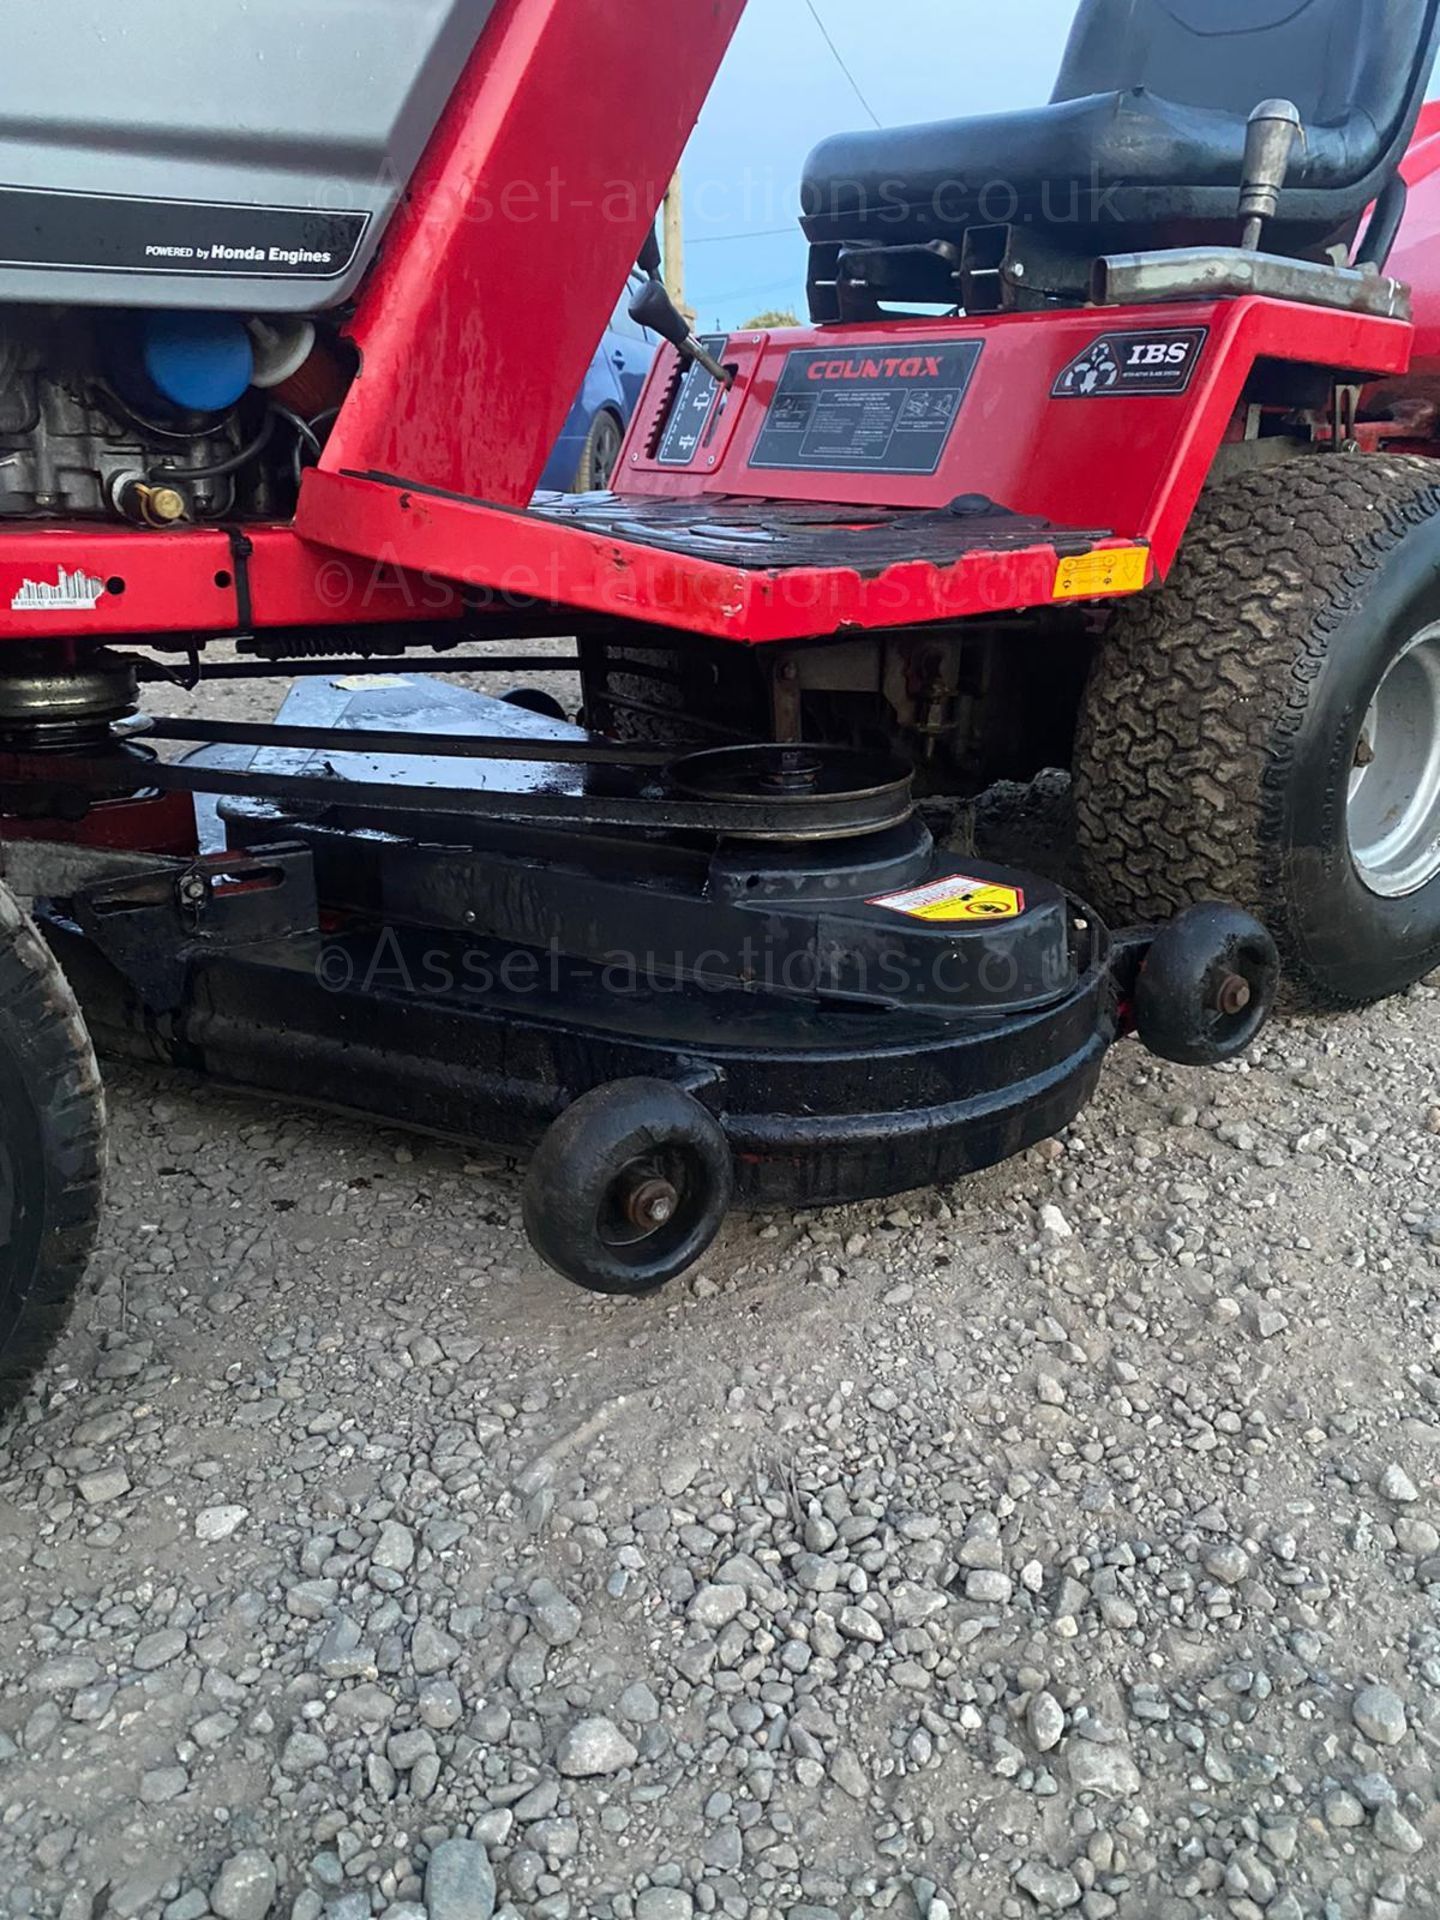 COUNTAX C600H RIDE ON LAWN MOWER, 4 WHEEL DRIVE, CUTS AND COLLECTS *NO VAT* - Image 7 of 7